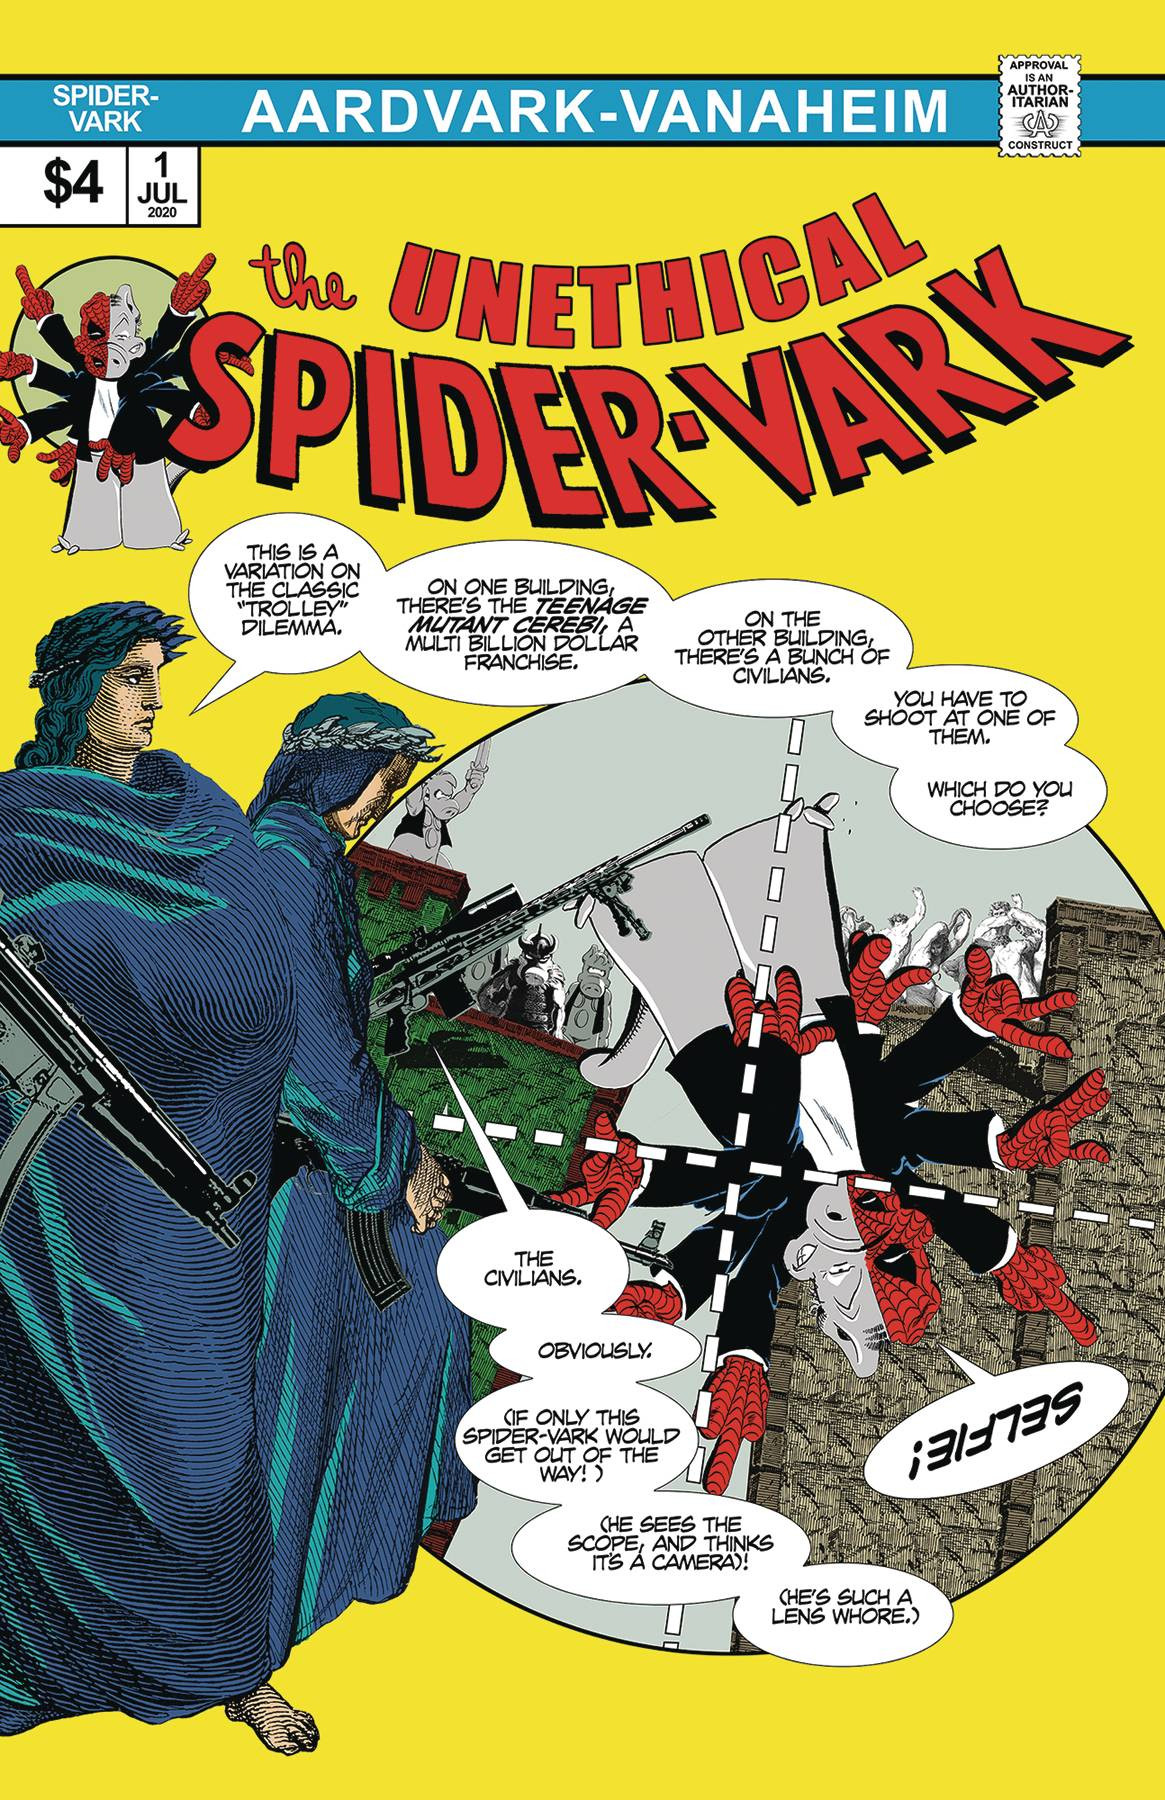 The Unethical Spider-Vark #1